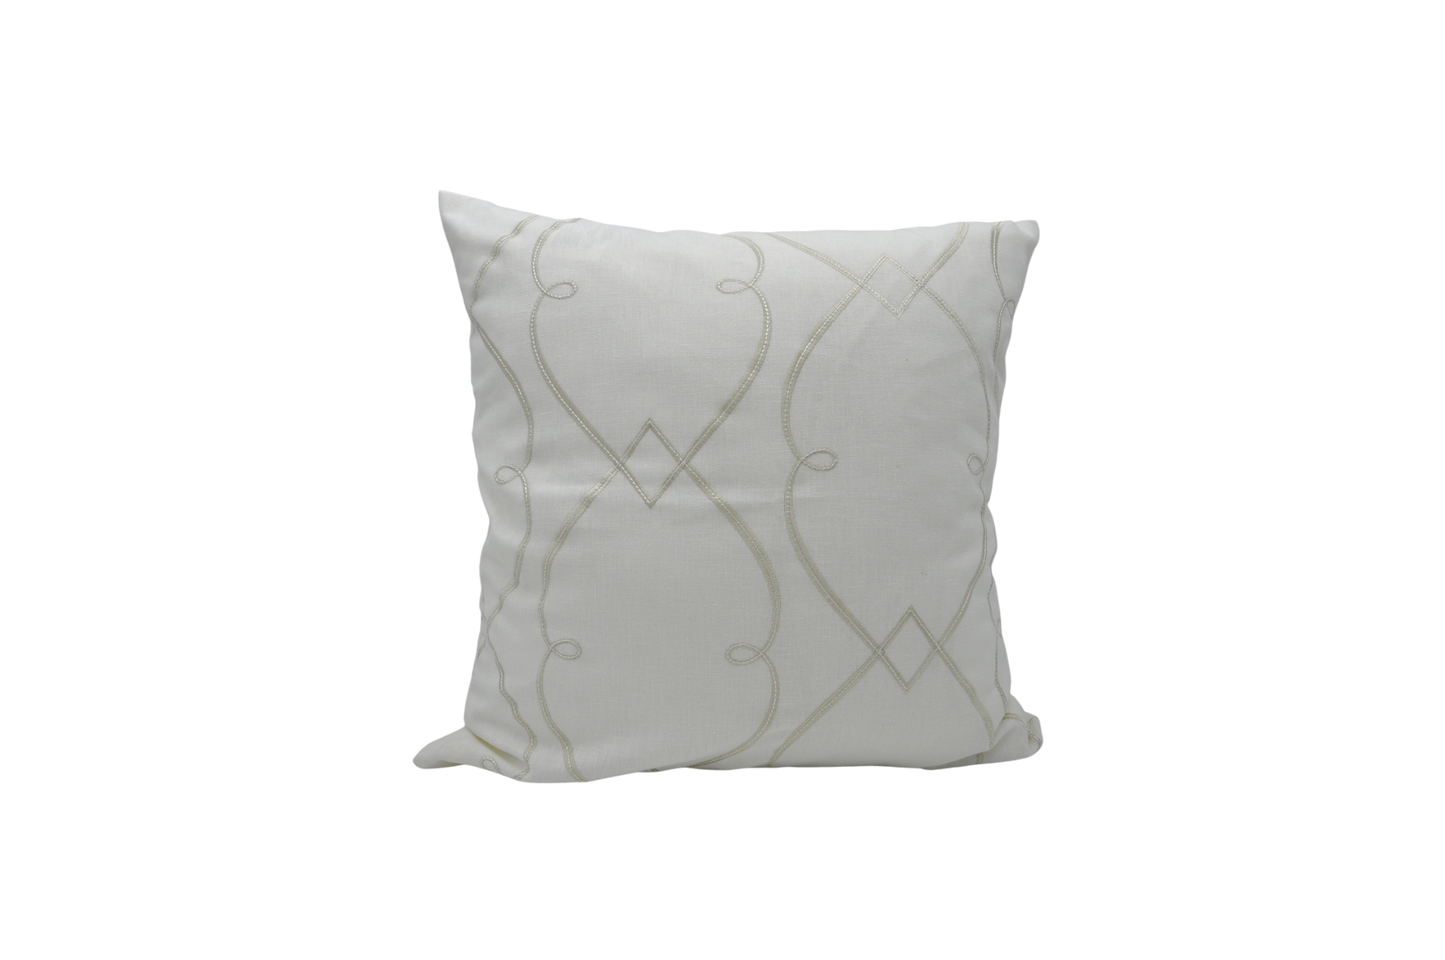 Pale Swirls - Sustainable Décor Pillows